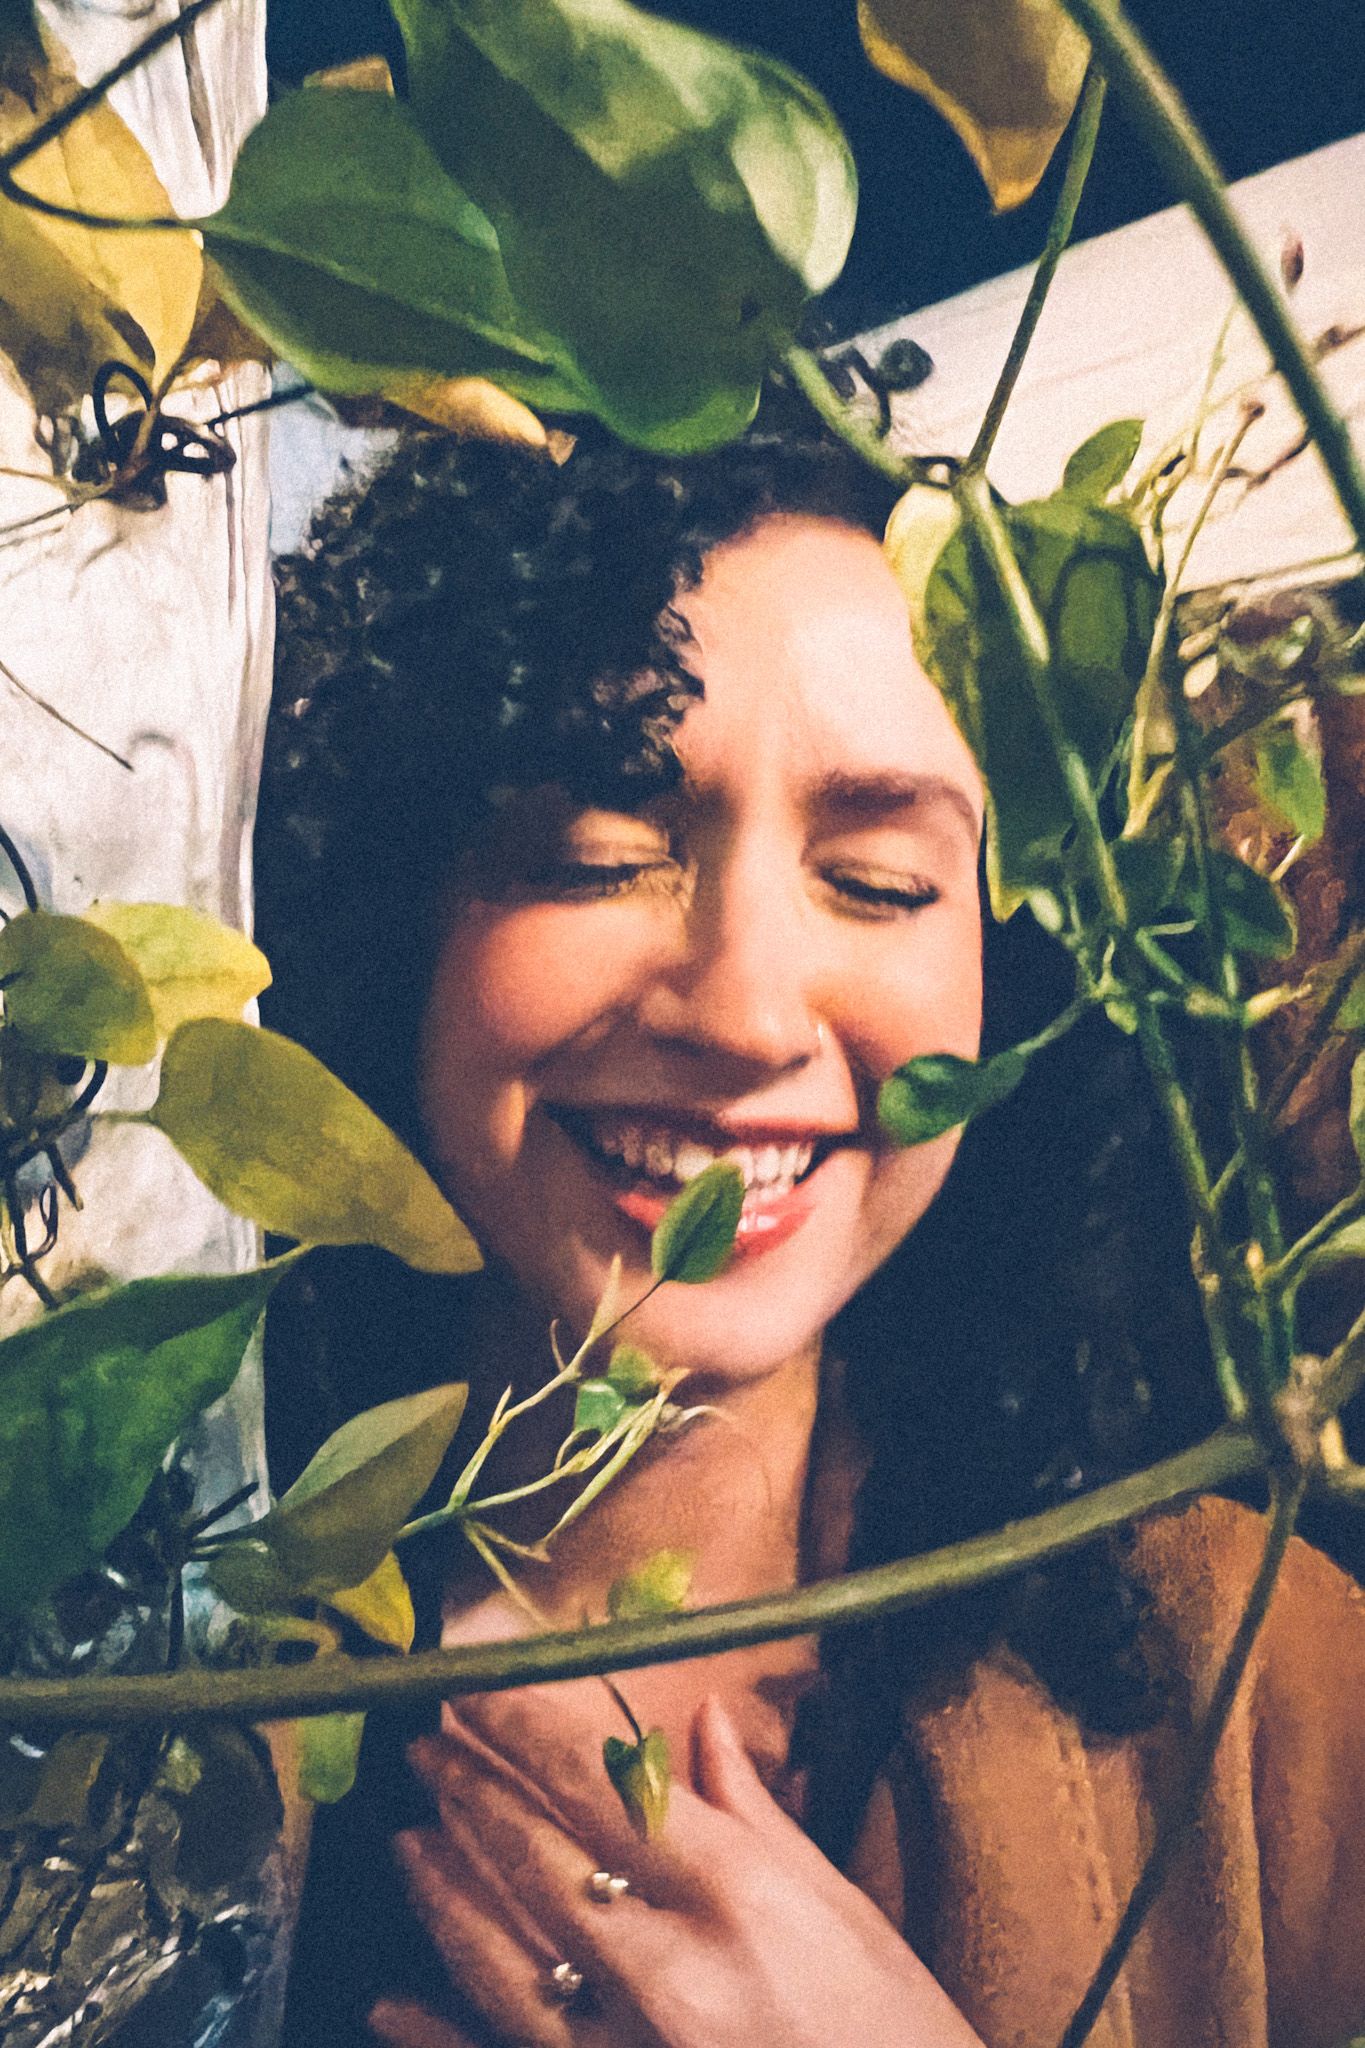 A woman grins and closes her eyes while laughing, her face framed in green fake ivy.